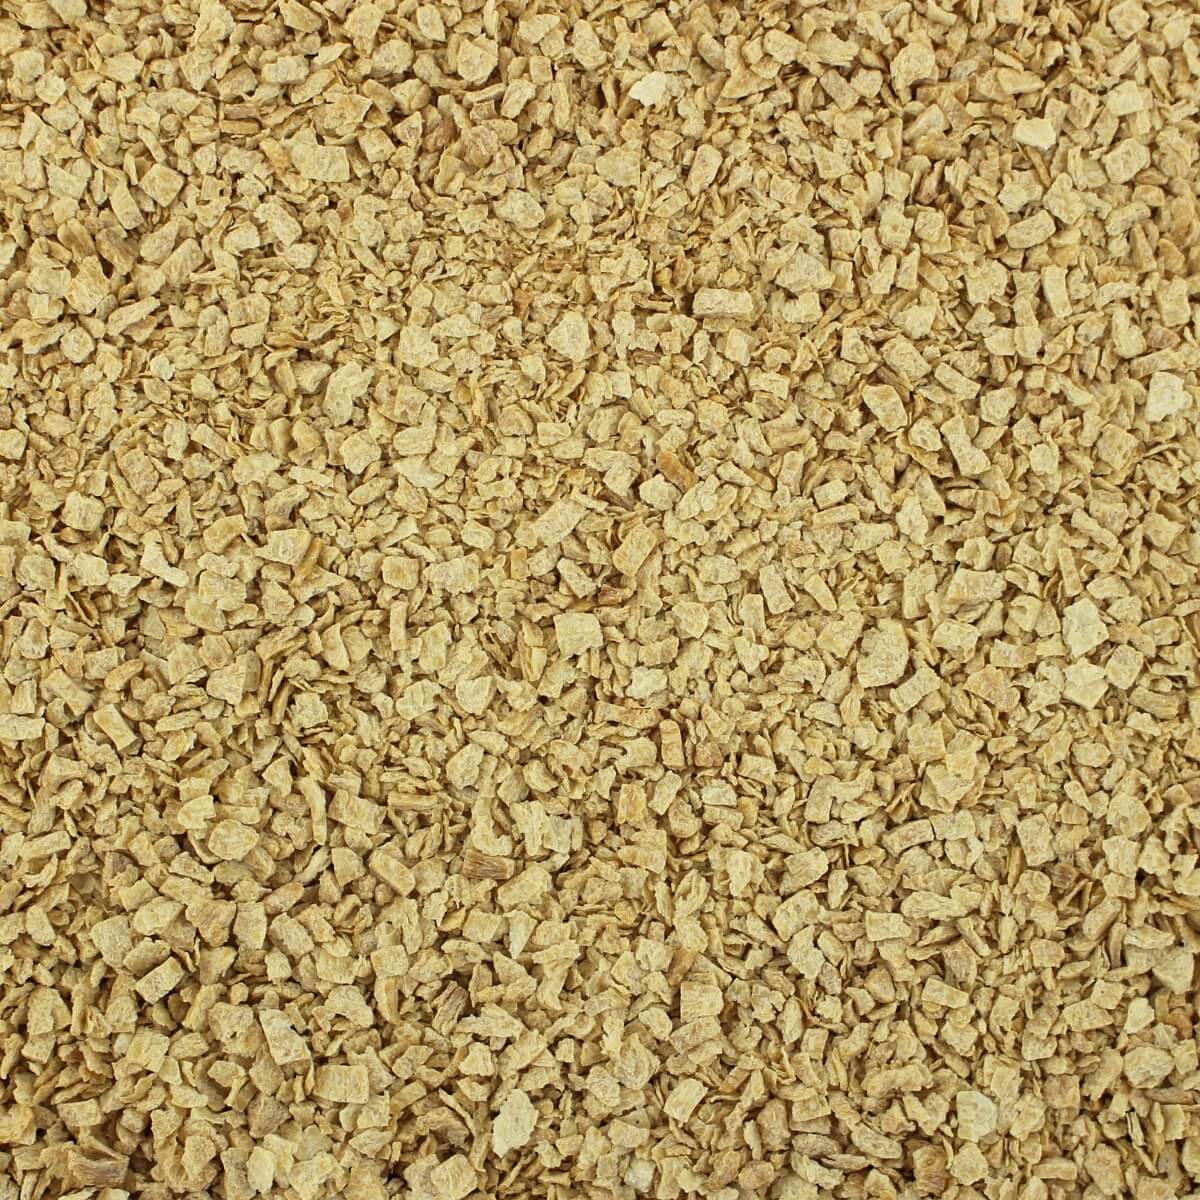 A close up image of a brown granule from Harmony House.